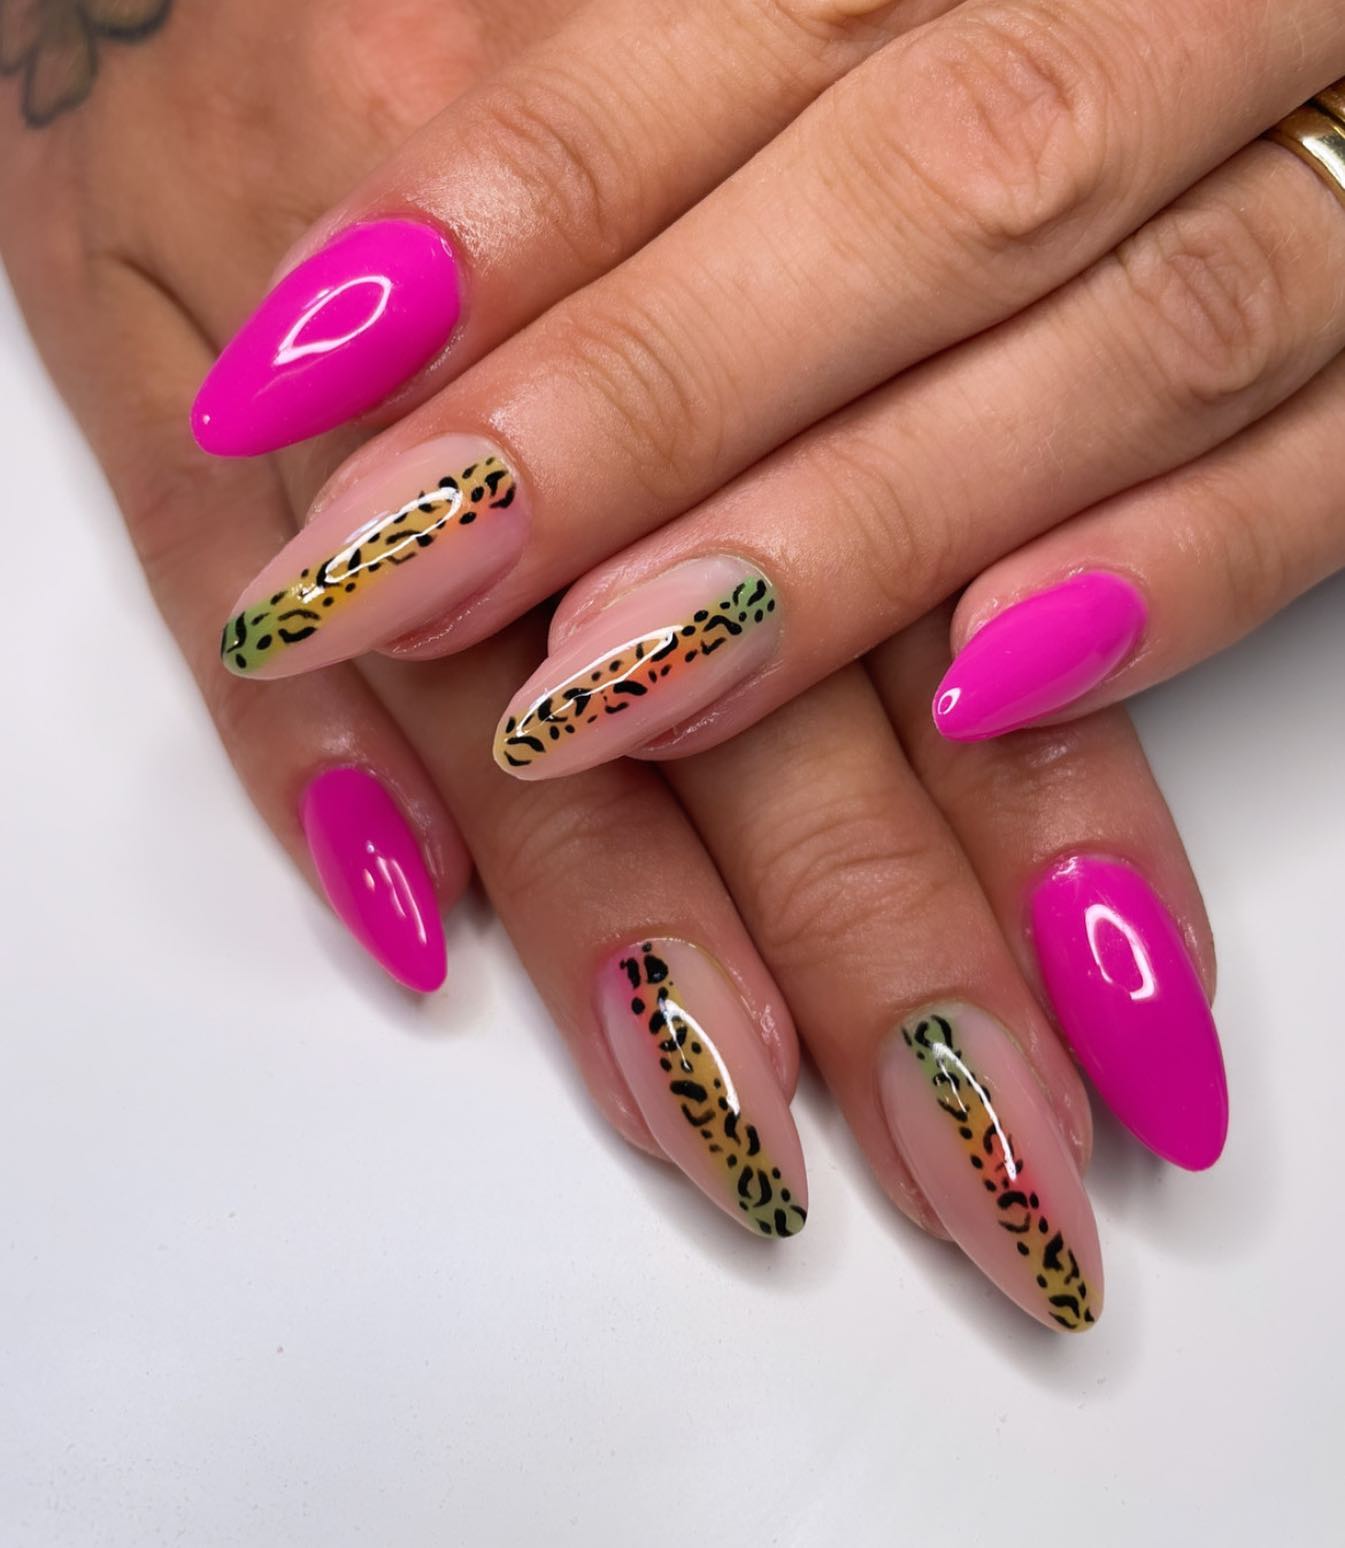 Oval pink nails and this nail art are so magical, don’t you agree? These will work and look so well for the prom or any formal dance that you may have.